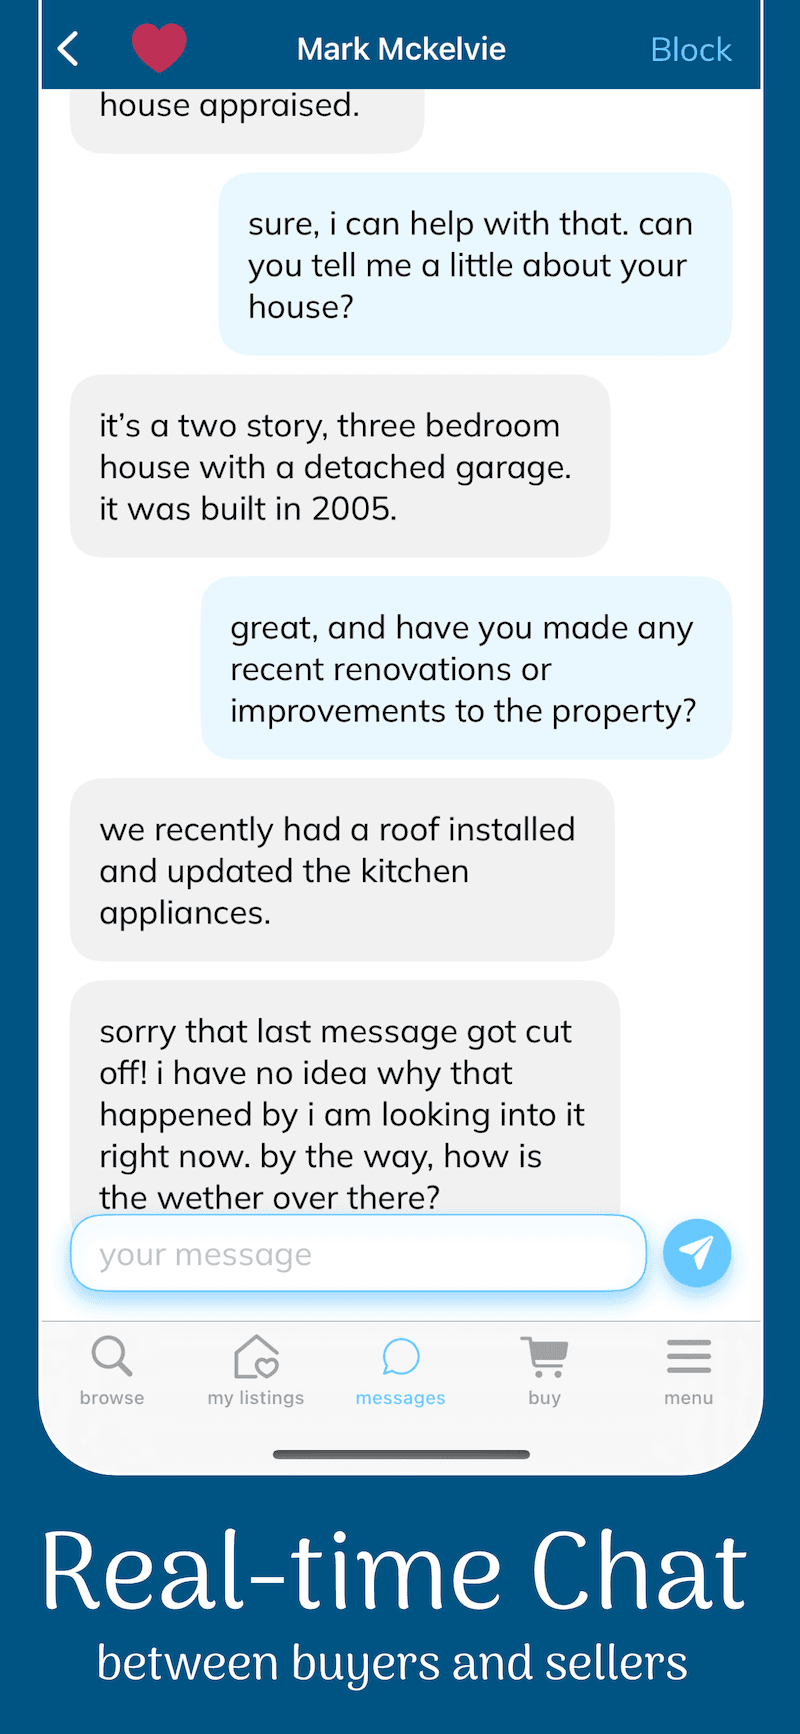 Chat with Buyers and Sellers in Real-time on Listella